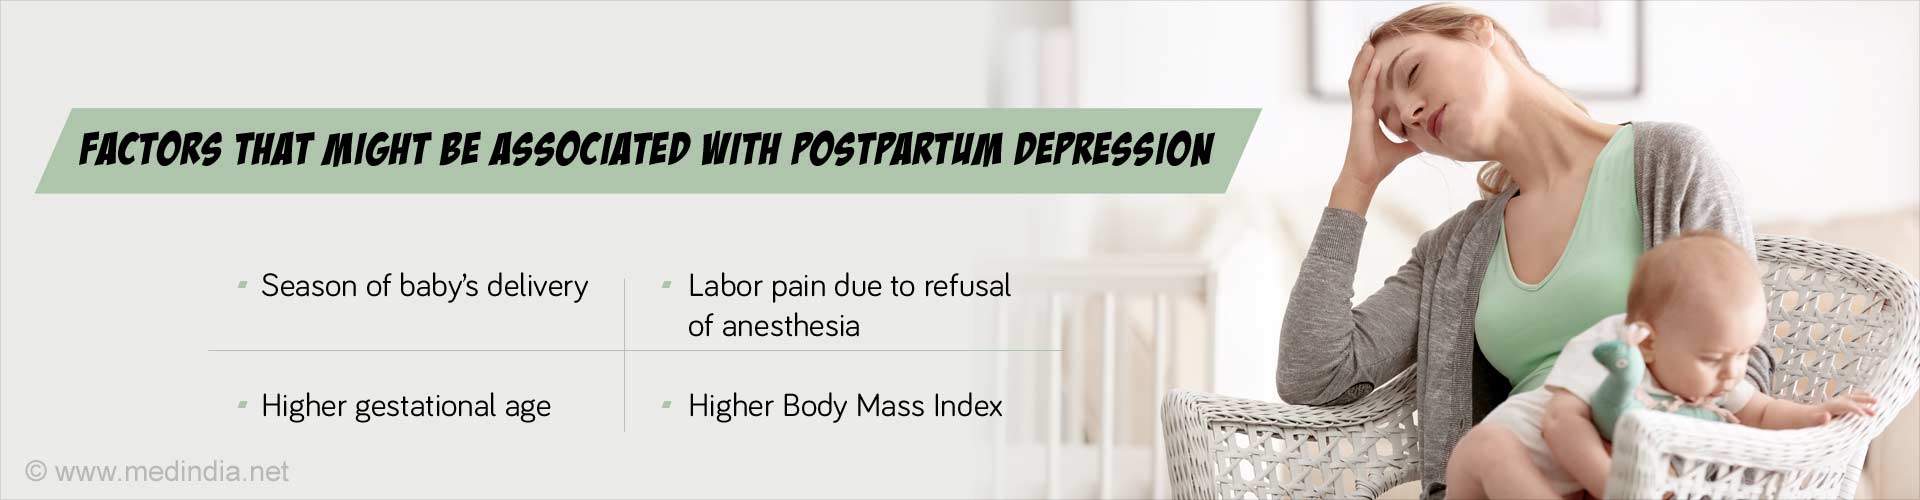 Factors that might be associated with postpartum depression
- Season of baby's delivery
- Labor pain due to refusal of anesthesia
- Higher gestational age
- Higher body mass index